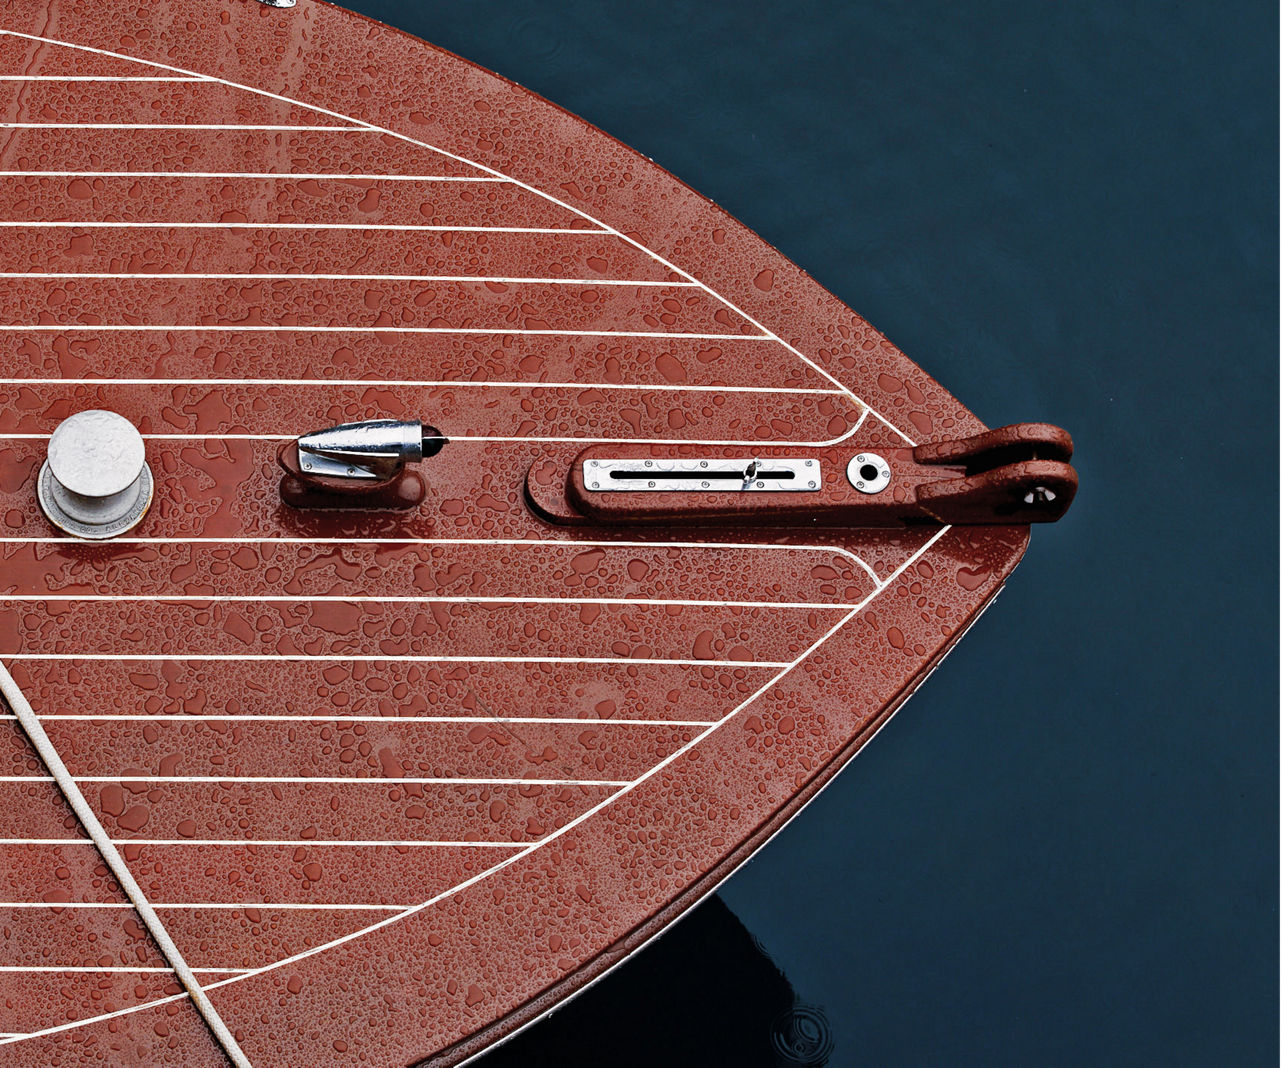 Top down shot of a boat.